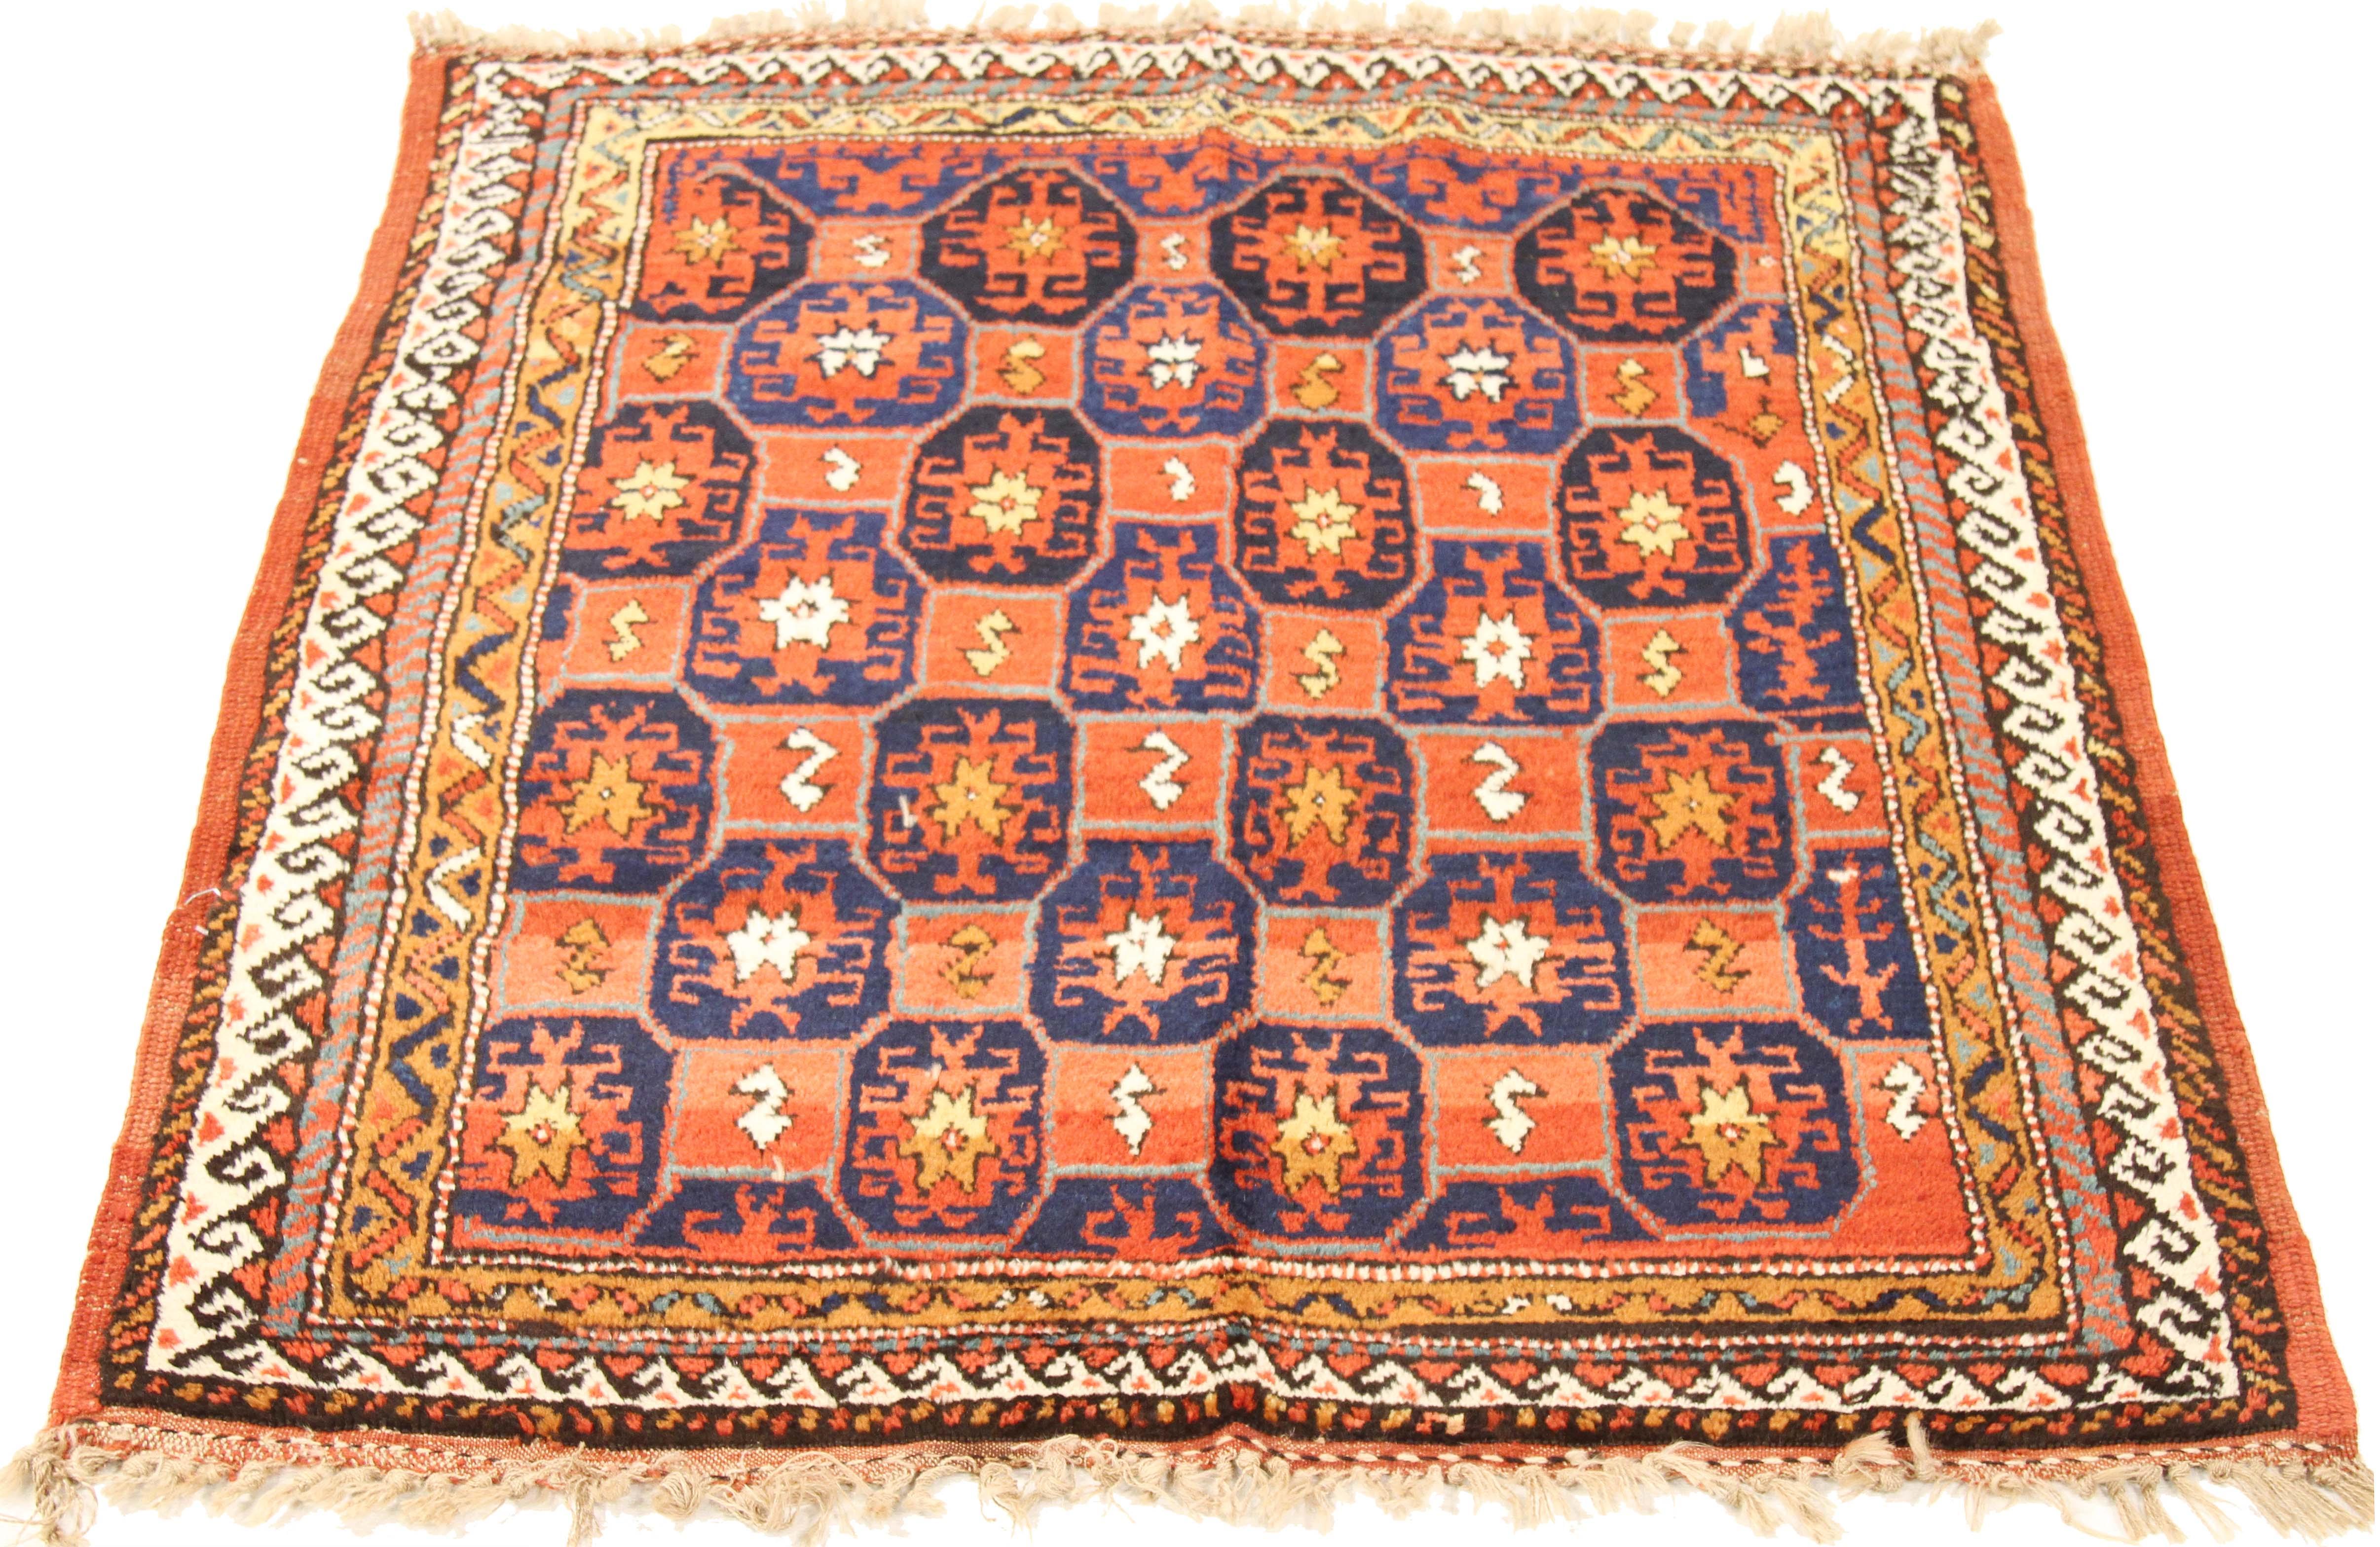 Antique Persian rug handwoven from the finest sheep’s wool and colored with all-natural vegetable dyes that are safe for humans and pets. It’s a traditional Kurdish design highlighted by large and small geometric medallions in navy and red. It’s a